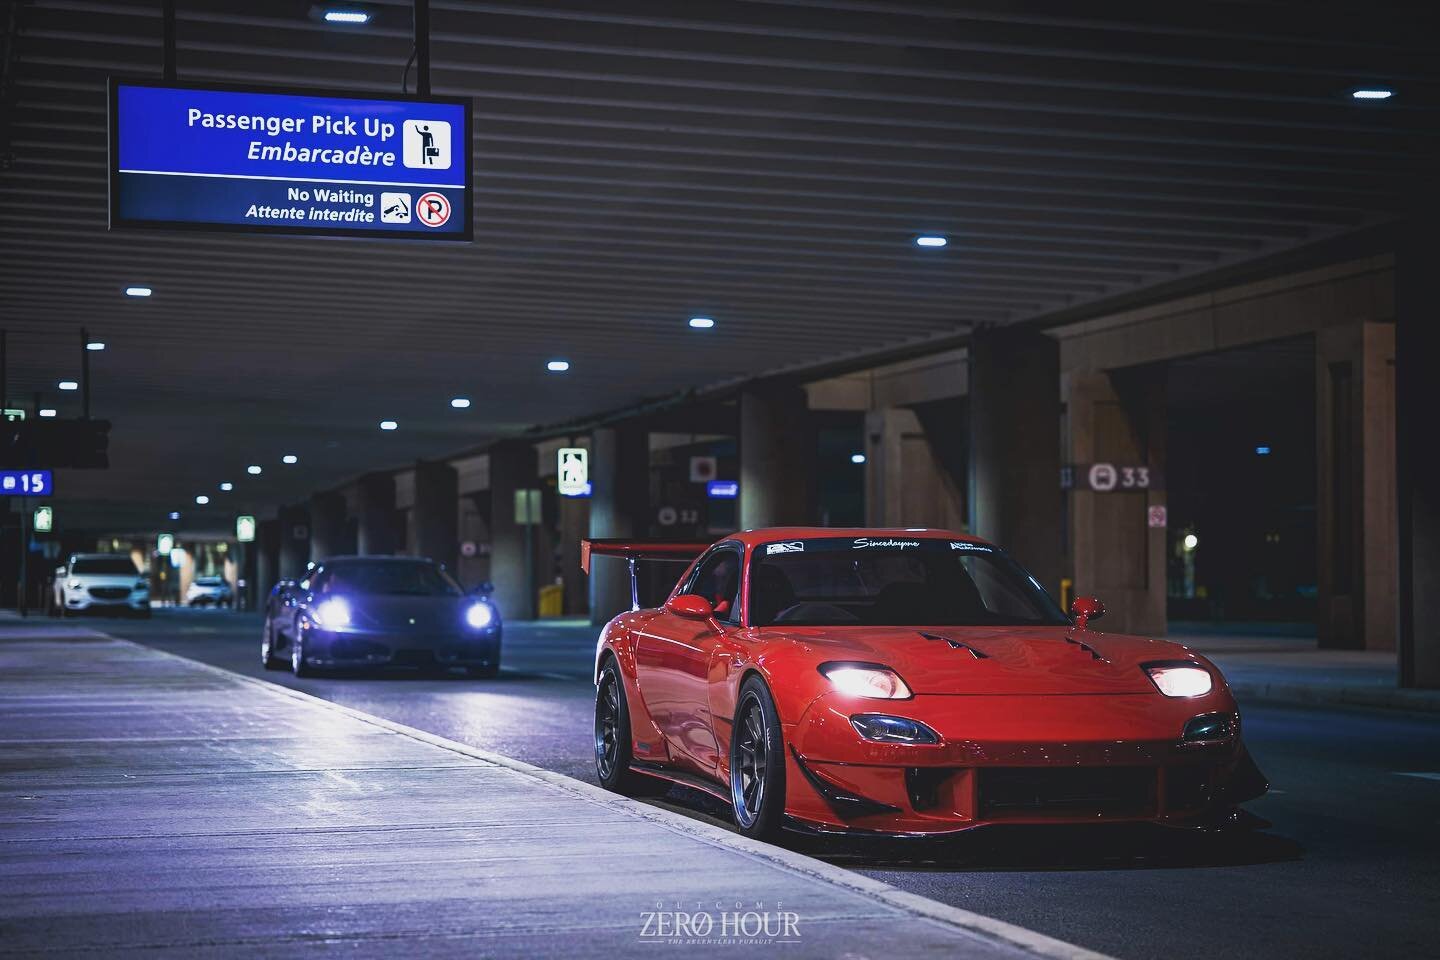 &quot;It is difficult to understand the universe if you only study one planet&quot; - Miyamoto Musashi

🚗: @ninesixmike 

#relentlessatzerohour #zerohourpursuit #ozh #relentlesspursuitozh #outcomezerohour #mazda #efini #rx7 #fd3s #13b #jdm #rotary #